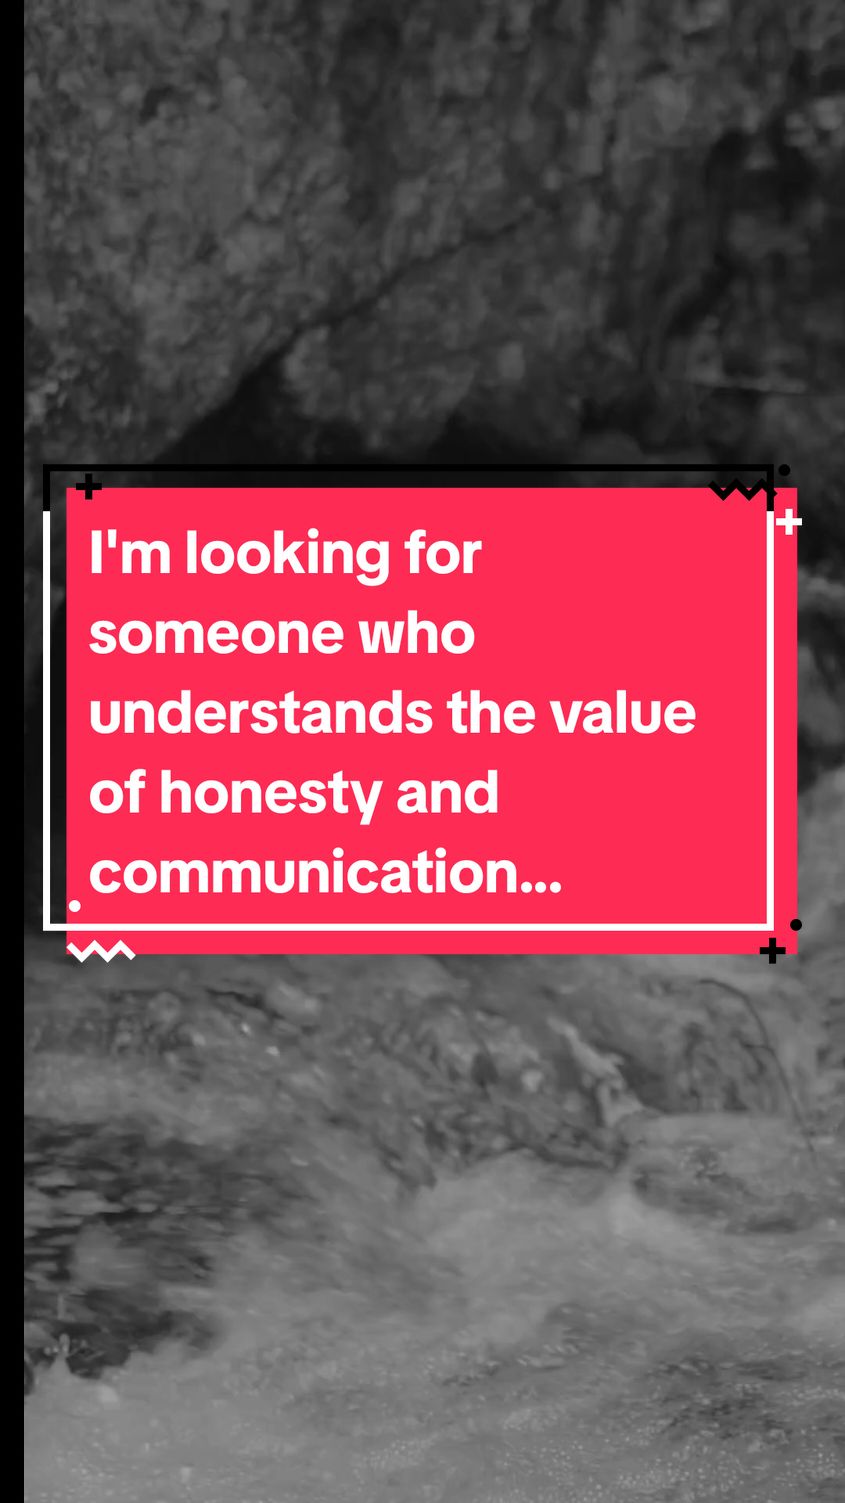 I'm looking for someone who understands the value of honesty and communication... #communication #inspiration #relatable #relationships #honesty #motivation #uktiktok #Love #couplegoals #marriage #fearlesstalk 